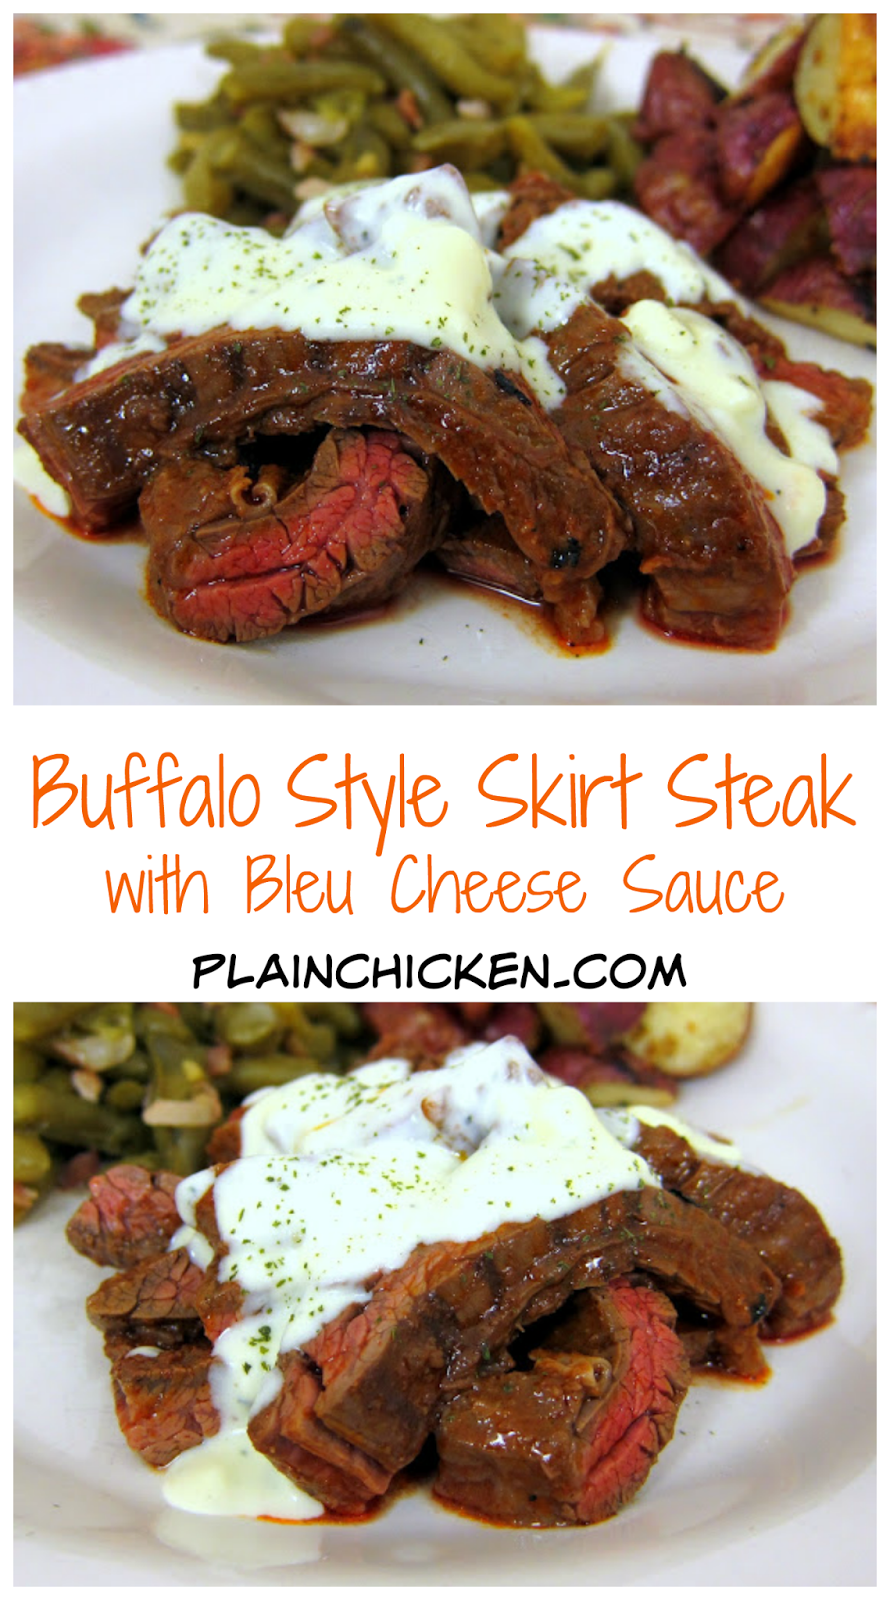 Buffalo Style Skirt Steak with Bleu Cheese Sauce recipe - skirt steak marinated in hot sauce, grilled and topped with a homemade bleu cheese sauce - SO good. Ready in under 20 minutes. Serve with some green beans and potatoes.